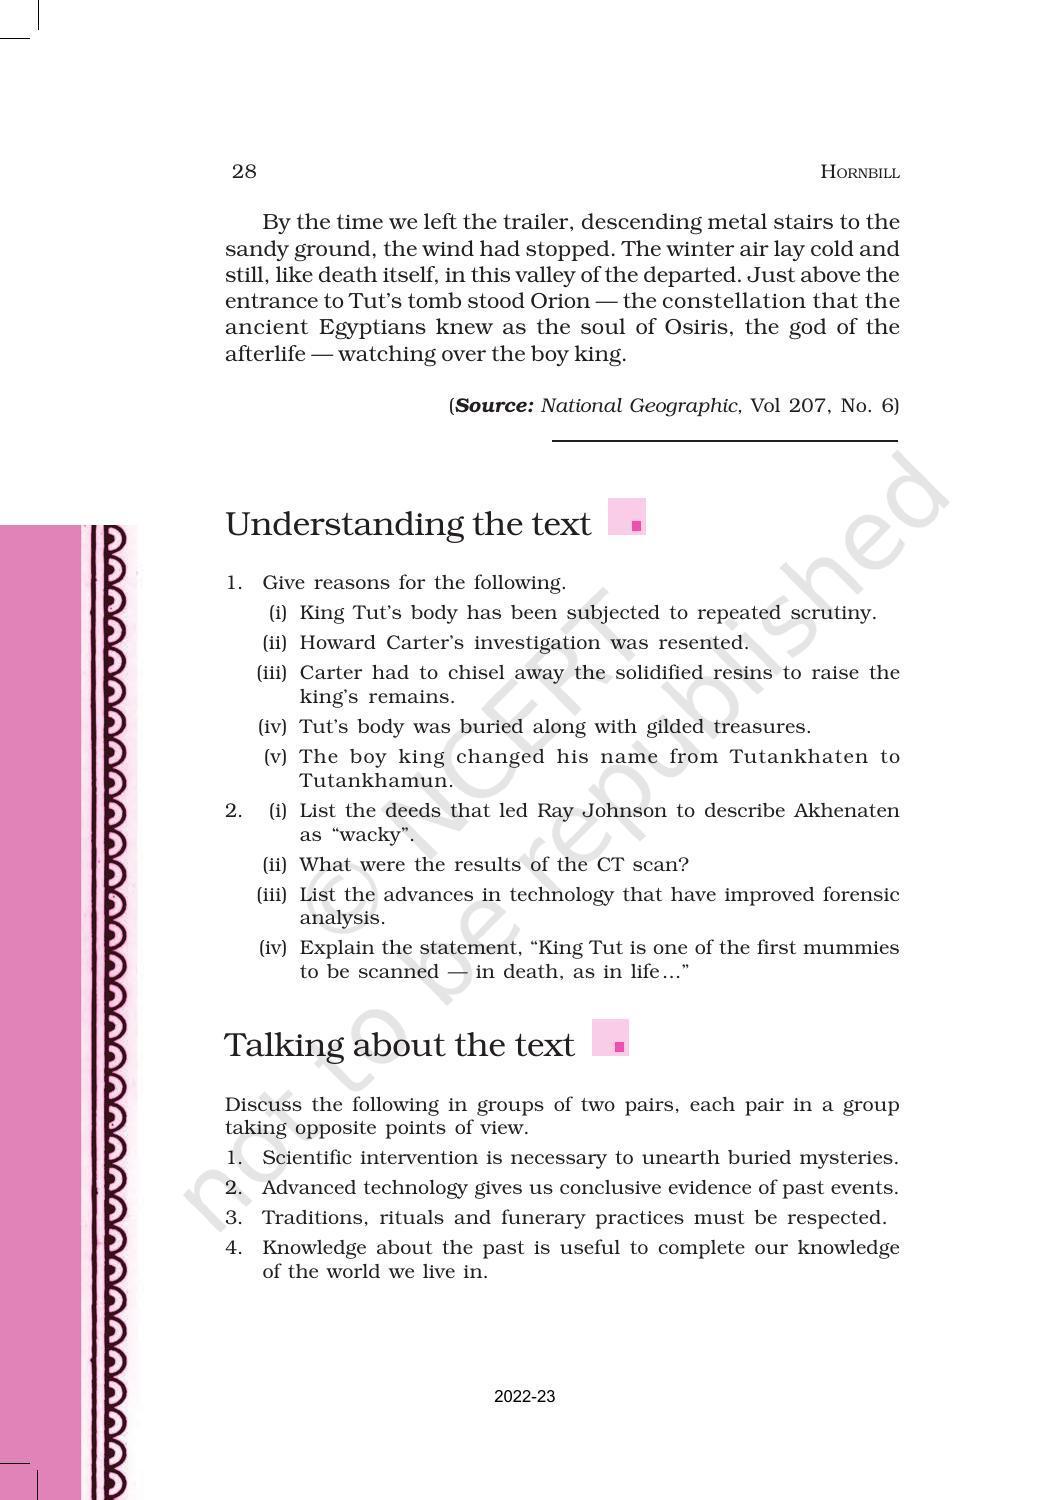 NCERT Book for Class 11 English Hornbill Chapter 3 Discovering Tut: The Saga Continues - Page 7